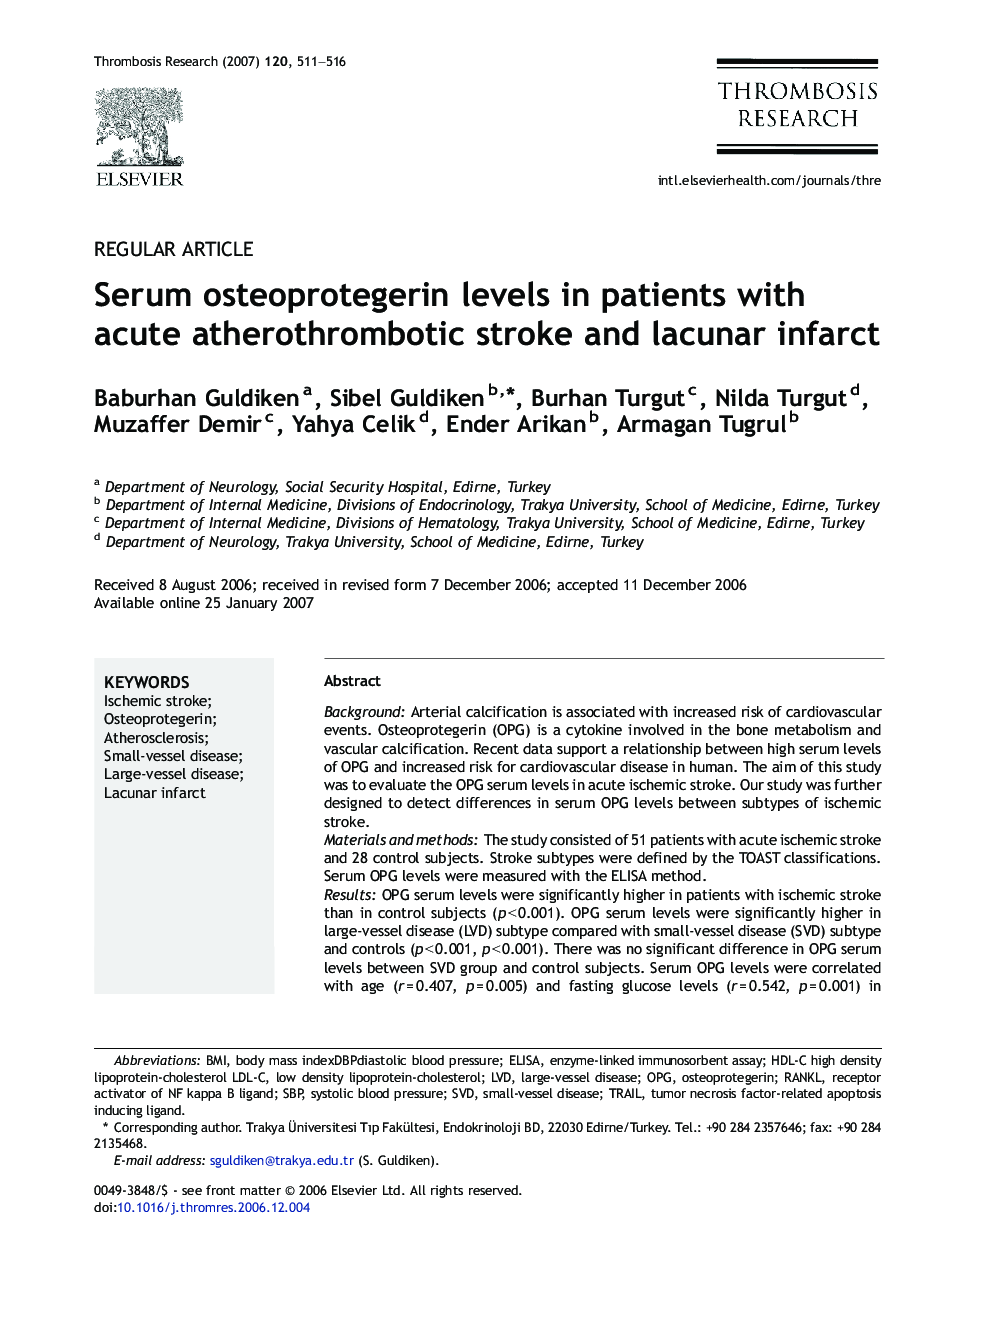 Serum osteoprotegerin levels in patients with acute atherothrombotic stroke and lacunar infarct